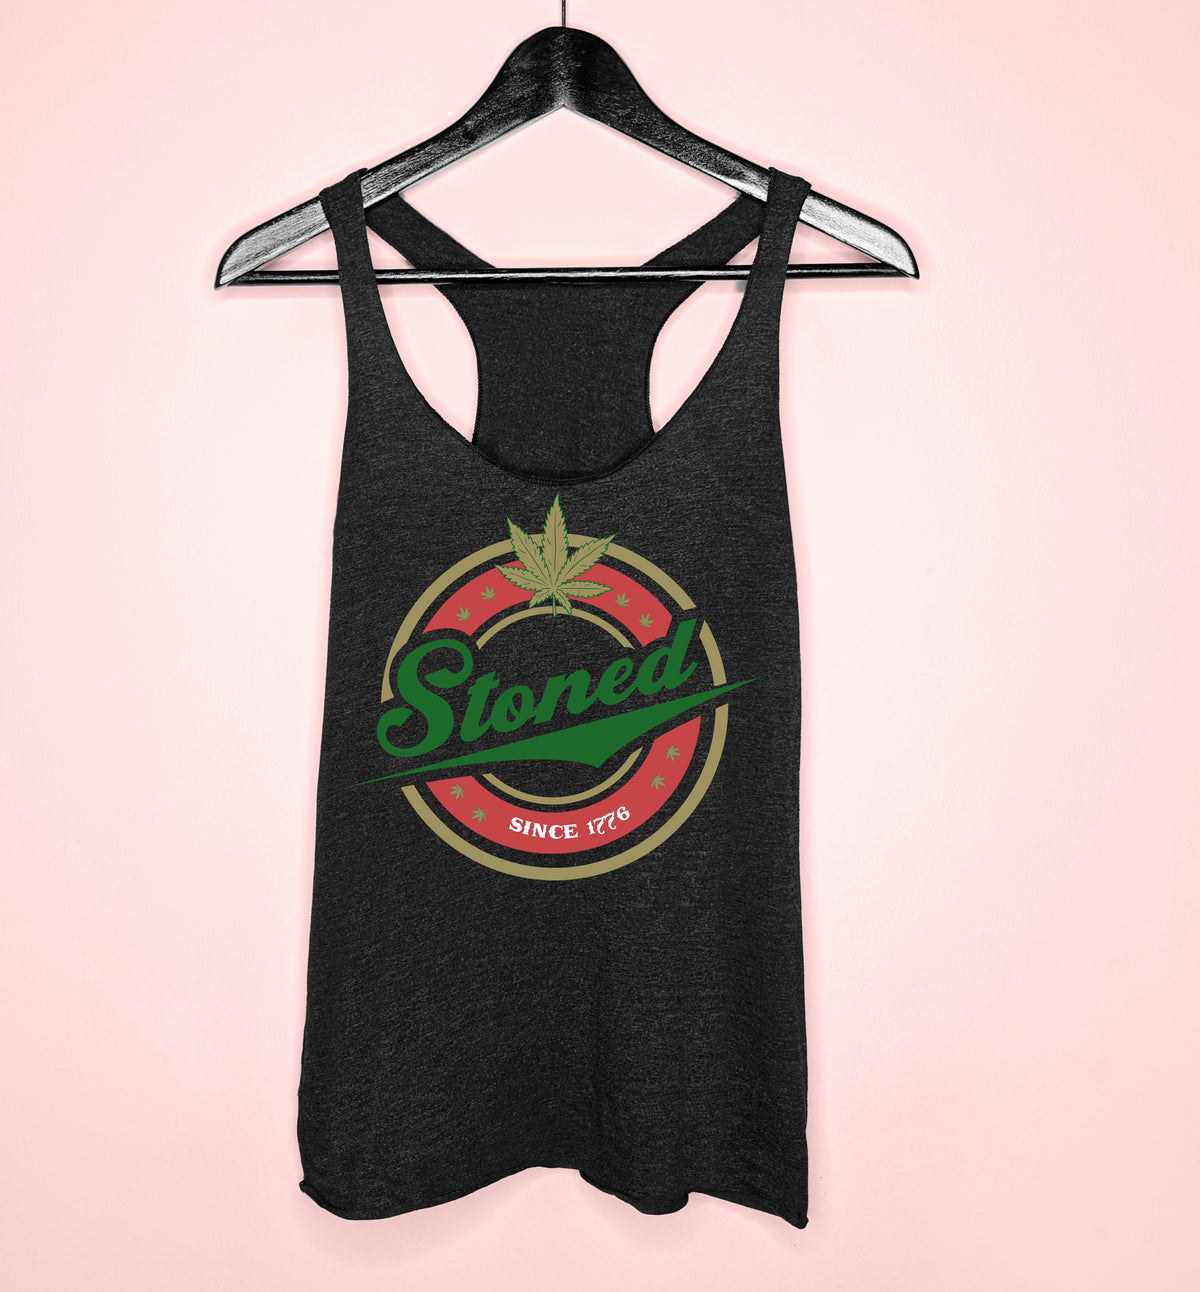 Black tank top with the miller lite logo saying stoned - HighCiti